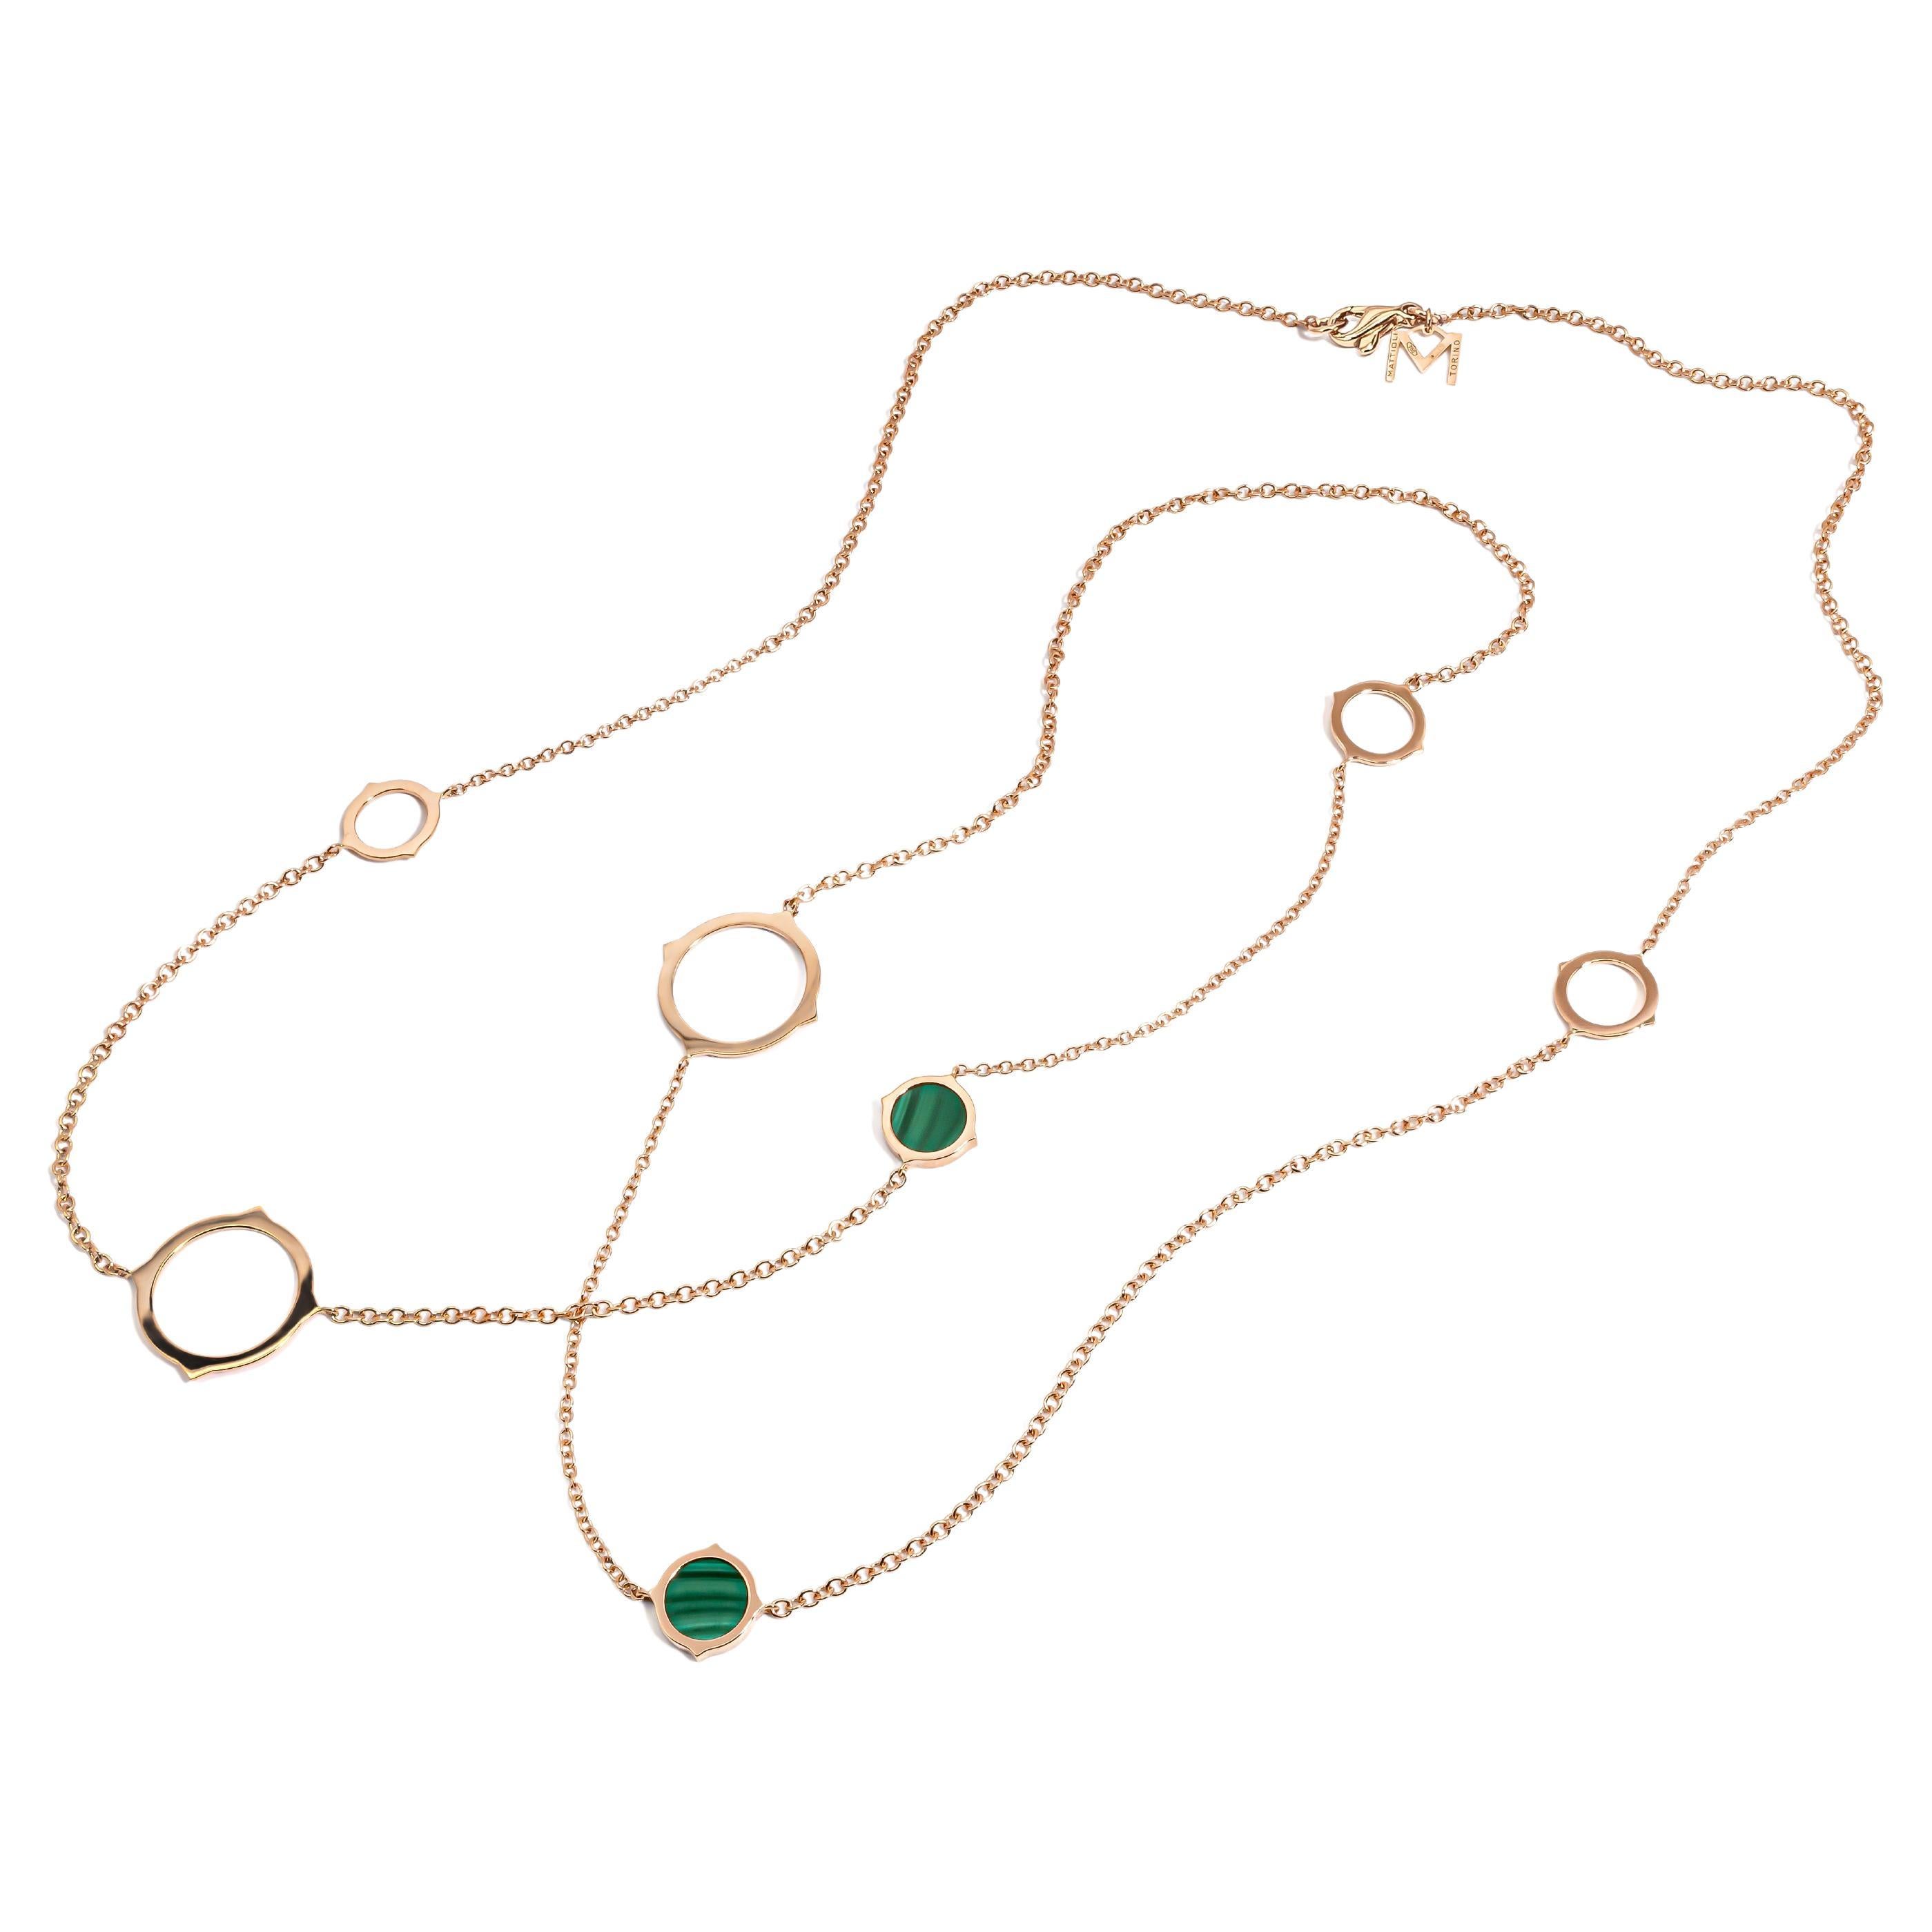 Mattioli Eve_r New Sautoir Necklace in Rose Gold & 2 Malachite Elements For Sale